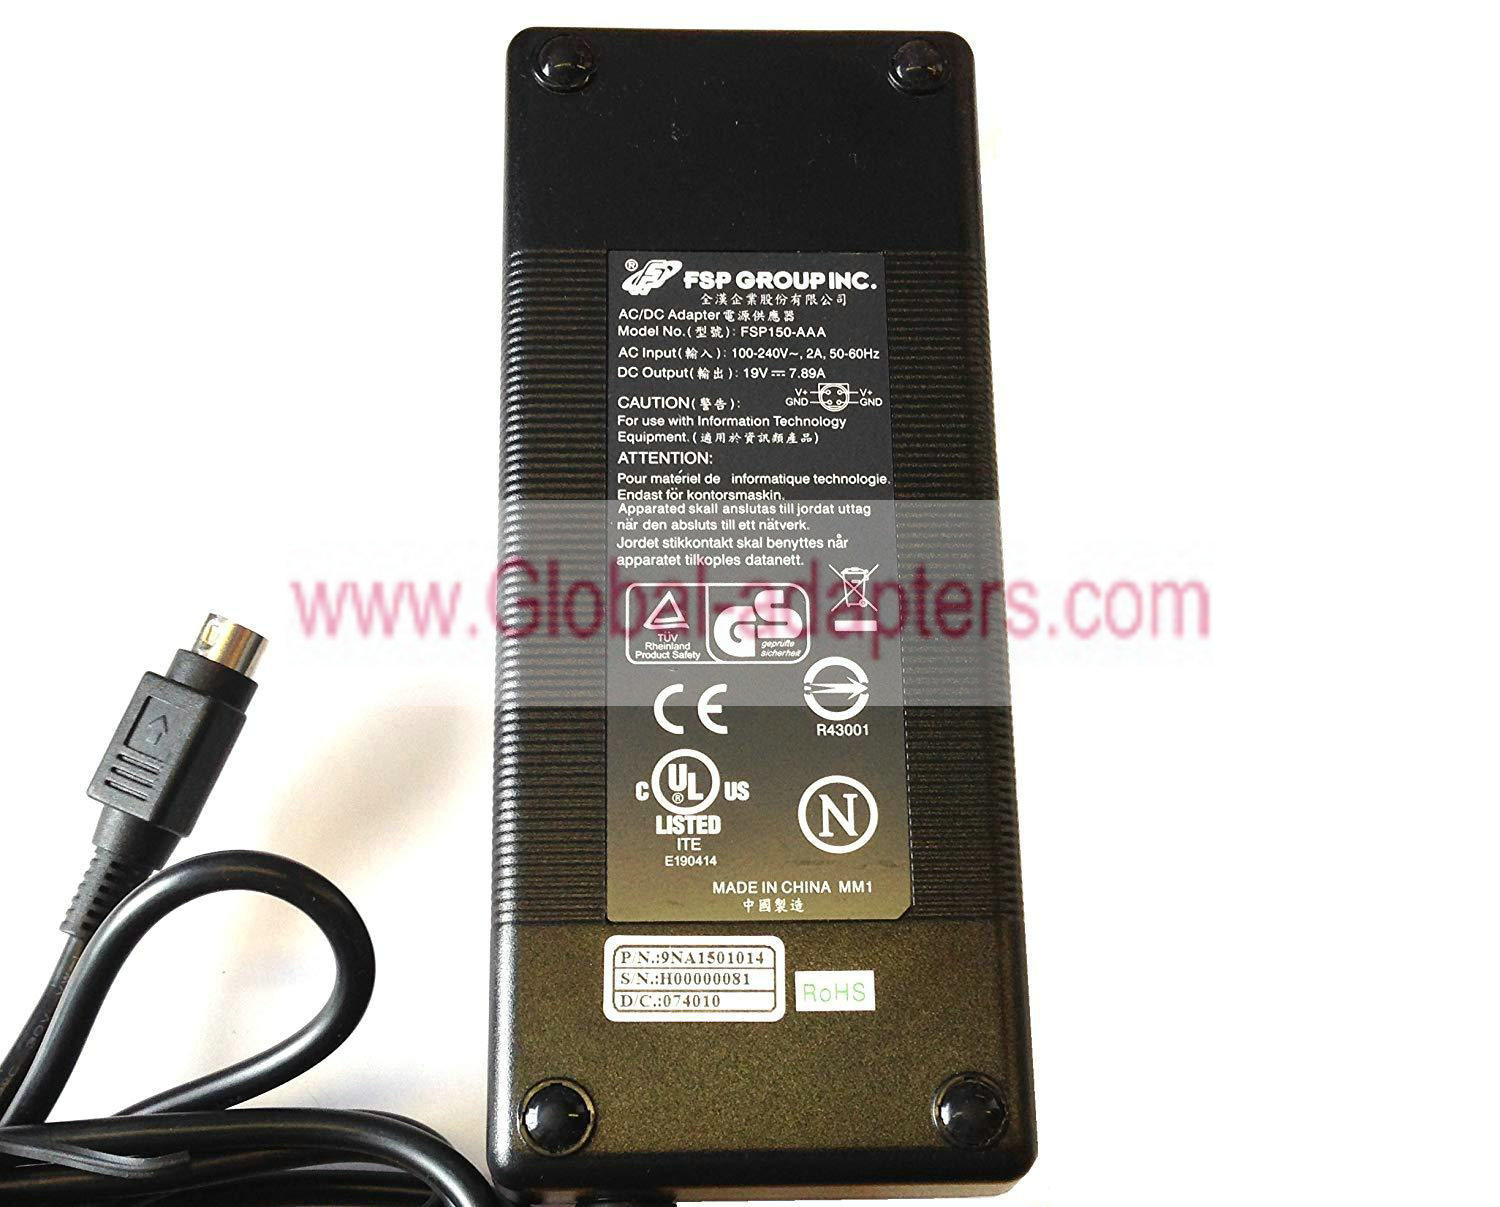 New FSP GROUP FSP150-ABAN1 19V 7.89A AC/DC ADAPTER 4 PIN DIN 9NA1501611